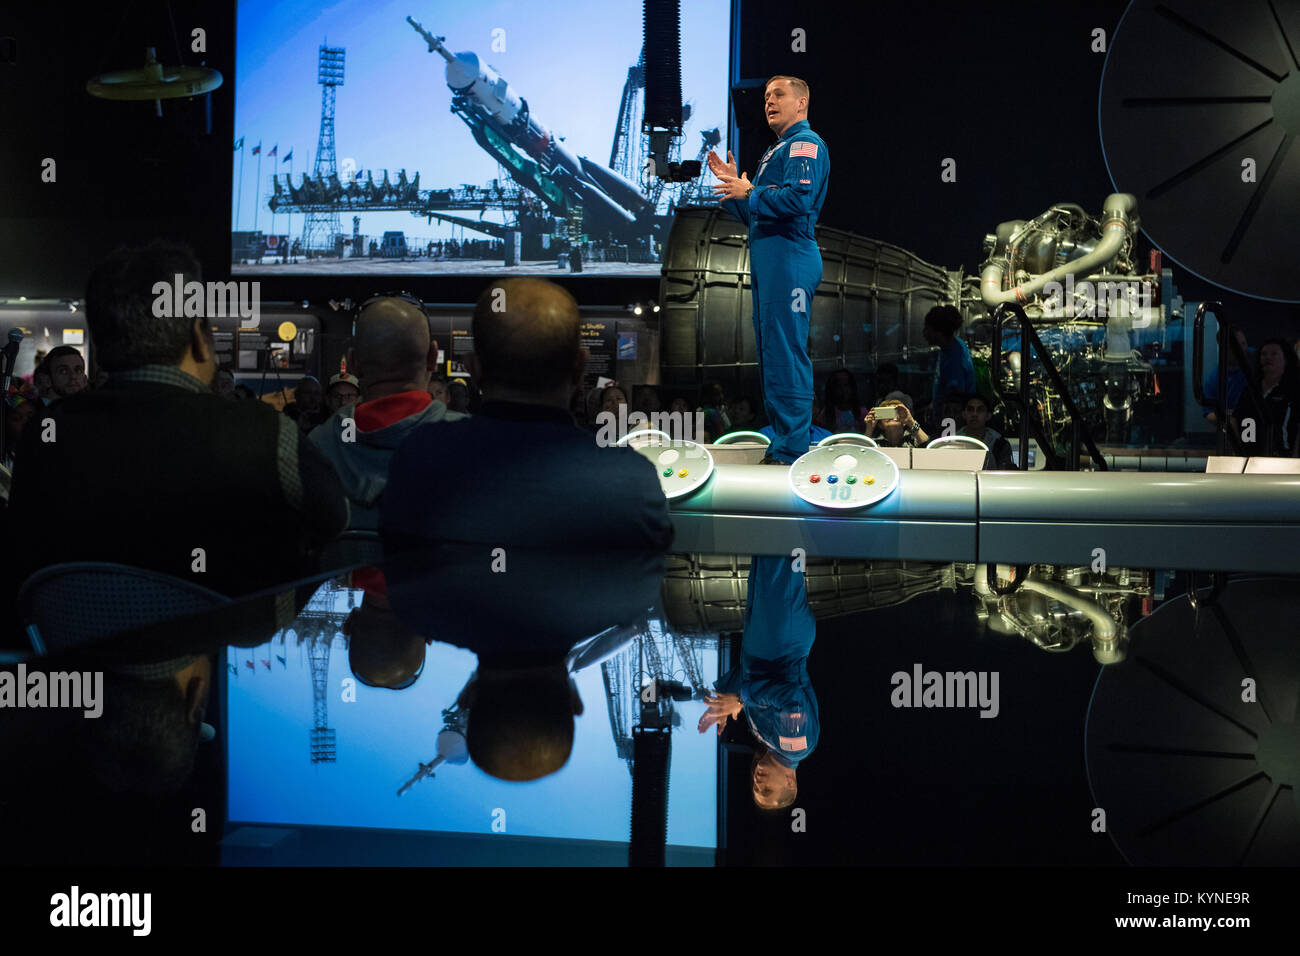 NASA astronaut Jack Fischer speaks about his time onboard the International Space Station (ISS) during Expeditions 51/52, Friday, Nov. 3, 2017 at Smithsonian's National Air and Space Museum in Washington. During Expedition 52, Fischer completed hundreds of scientific experiments and two spacewalks, and concluded his 136-day mission when he landed in a remote area near the town of Zhezkazgan, Kazakhstan in September 2017. Photo Credit: (NASA/Aubrey Gemignani) Stock Photo